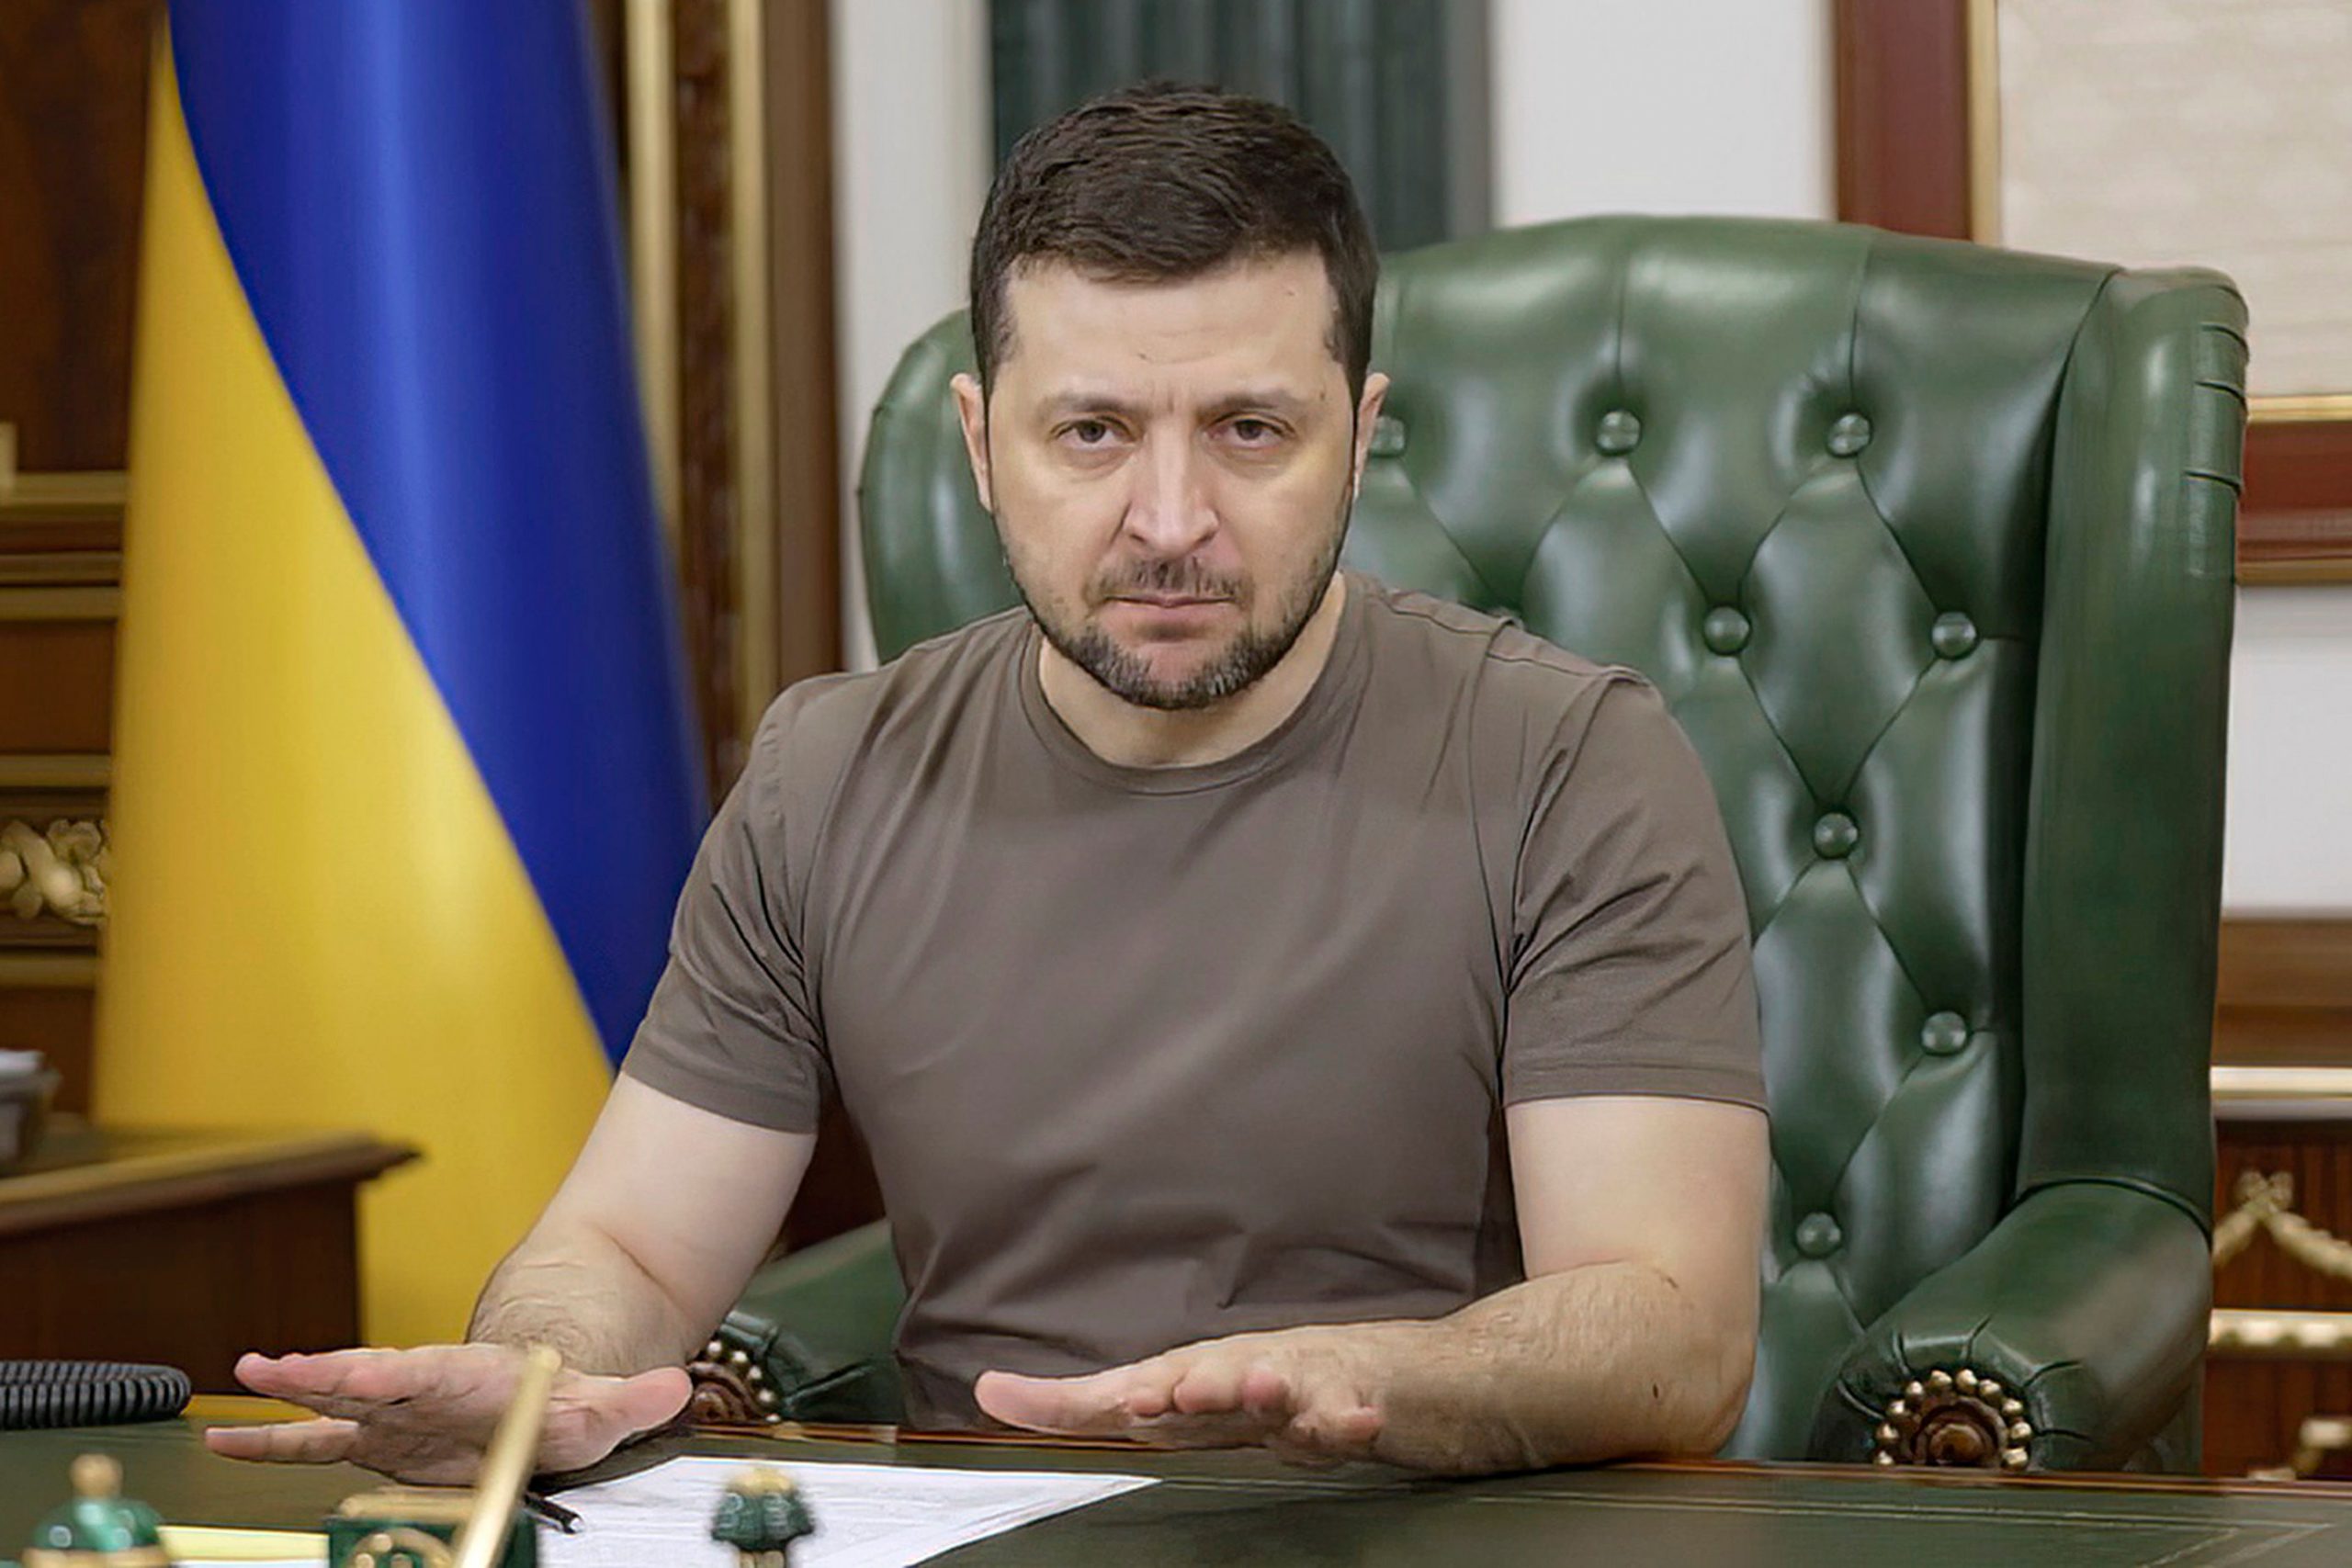 How Zelensky can assist Ukrainians displaced by Russian invasion: Explained